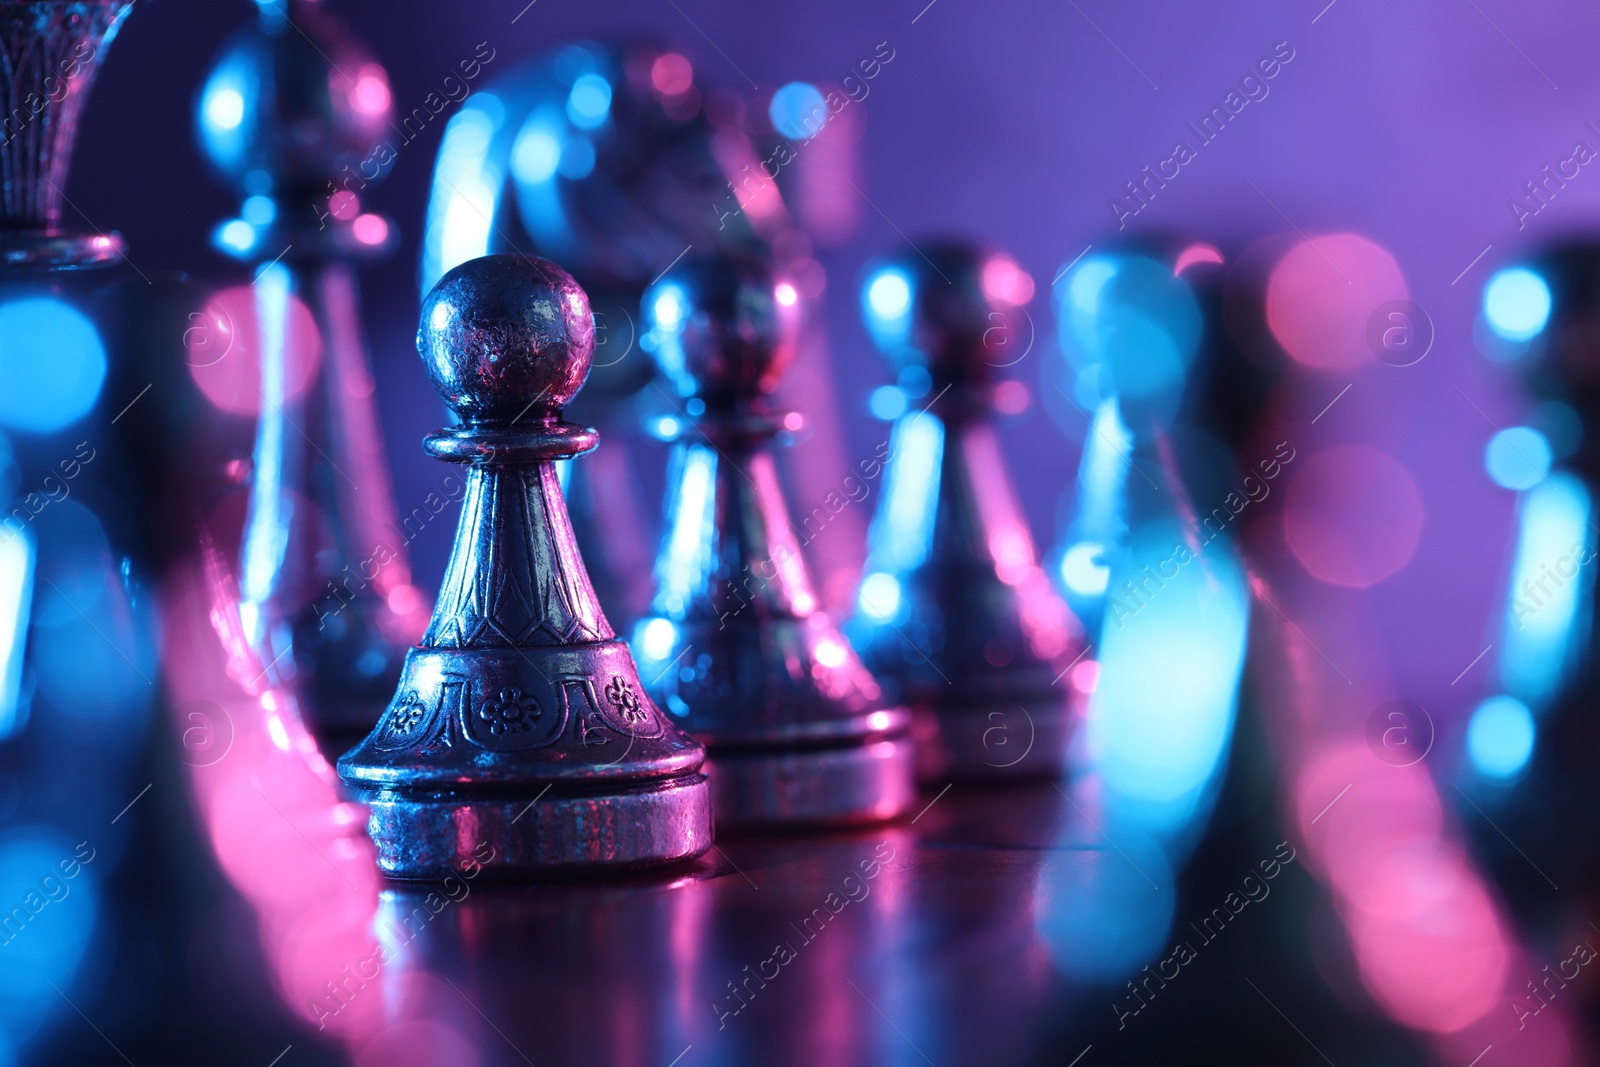 Photo of Chess pawns among other pieces on checkerboard in color light, selective focus